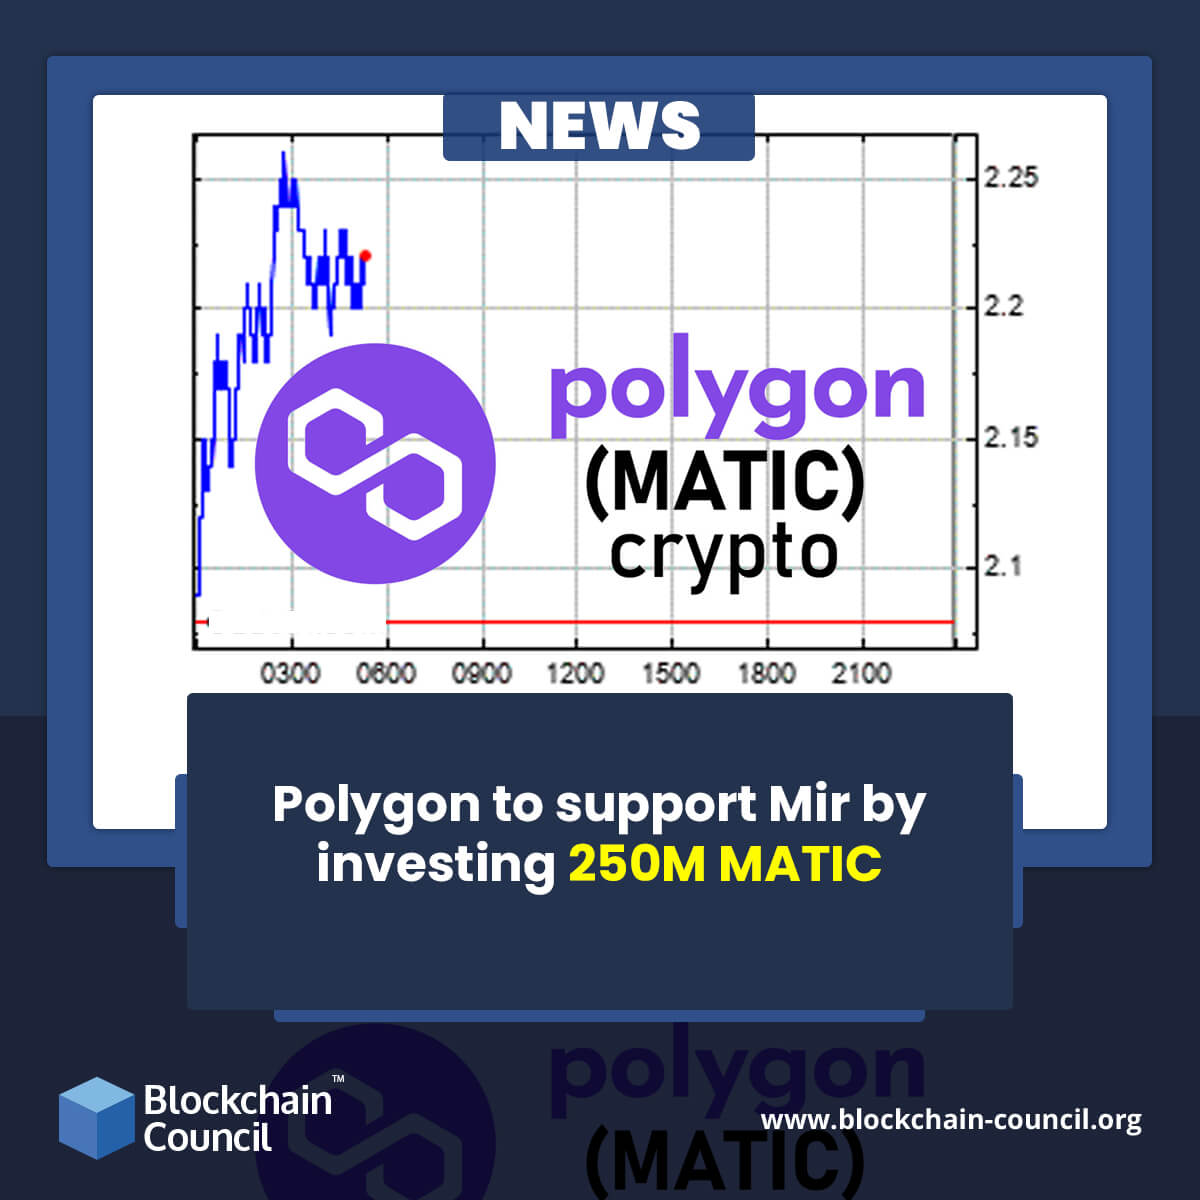 Polygon to support Mir by investing 250M MATIC